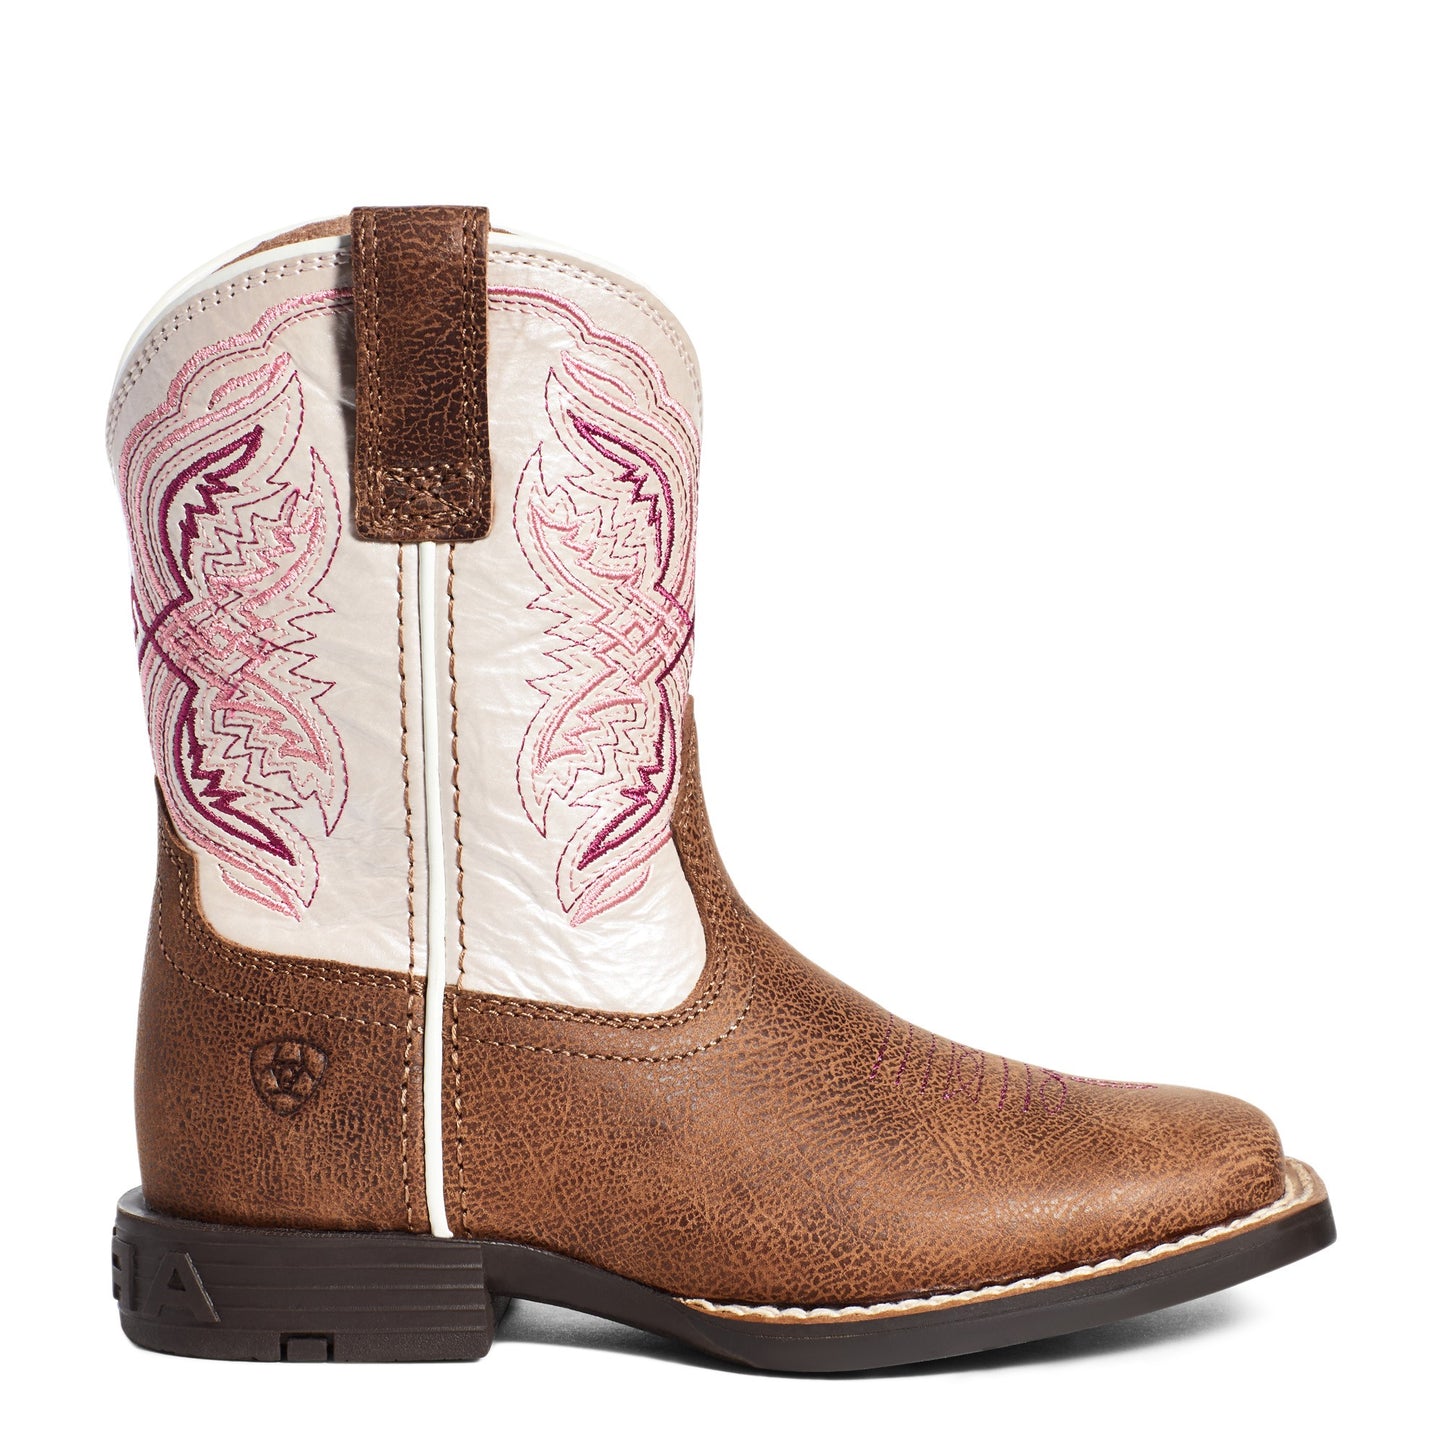 Ariat Kid's Double Kicker Adobe Tan & Pearlized Pink Boots 10036850